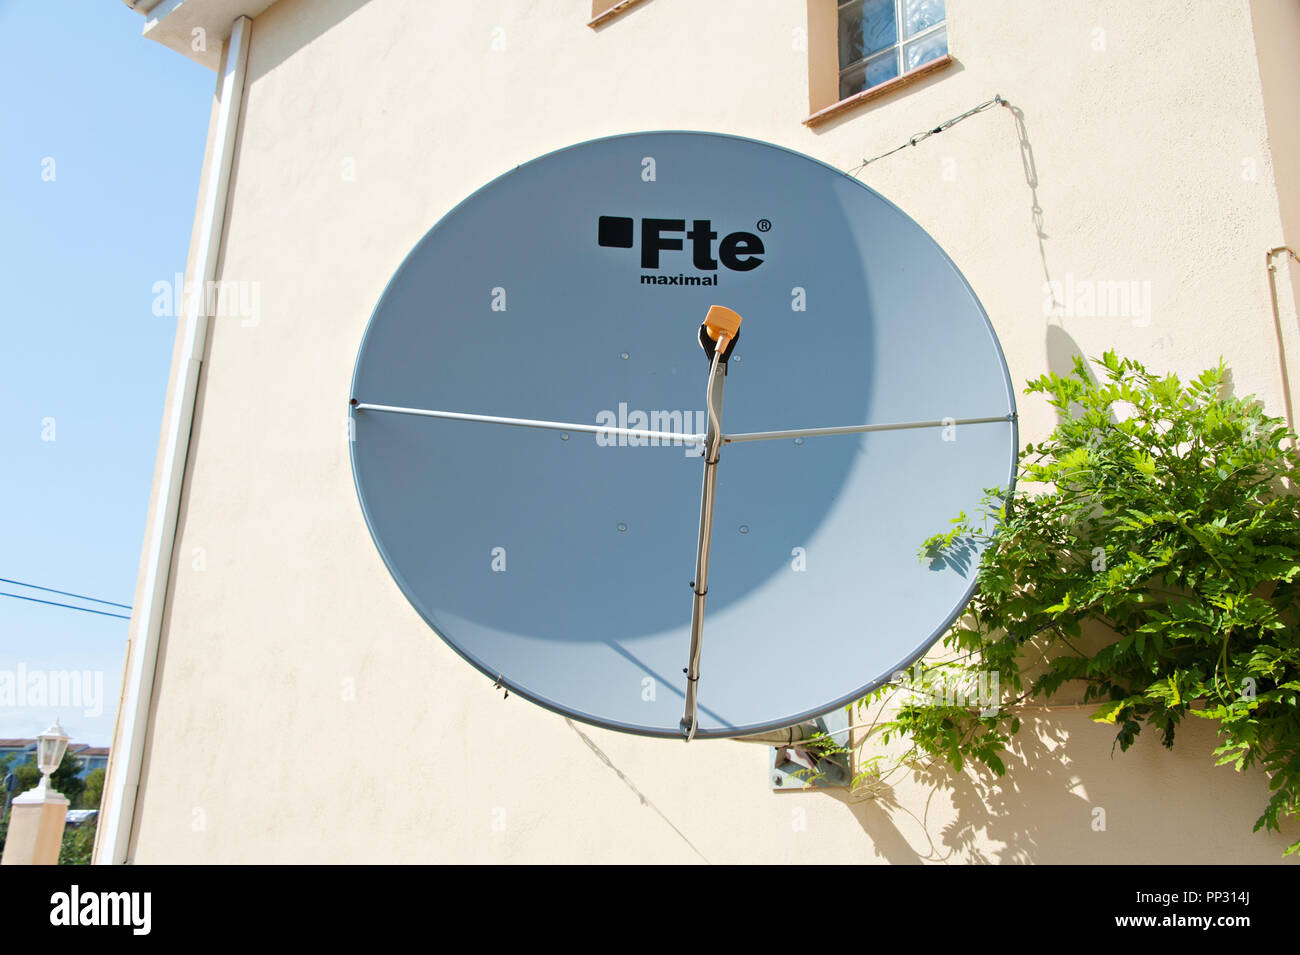 A large 150cm satellite dish can be used to view british television channels from Europe. This one is located in Spain. Stock Photo